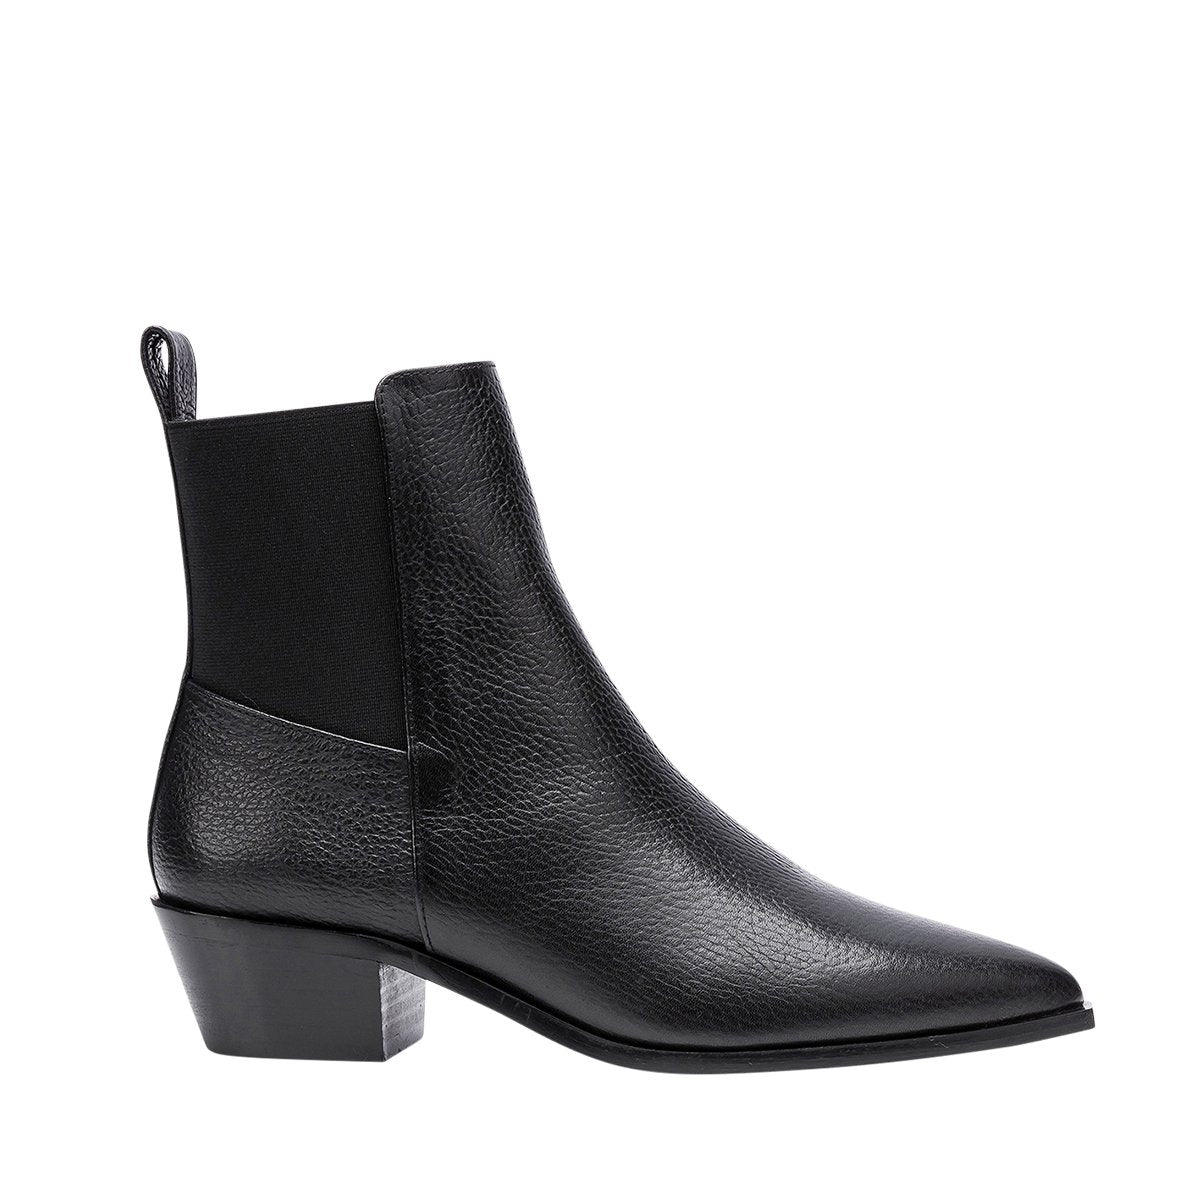 Willow Leather Black Boots 20020814701-001 - 1